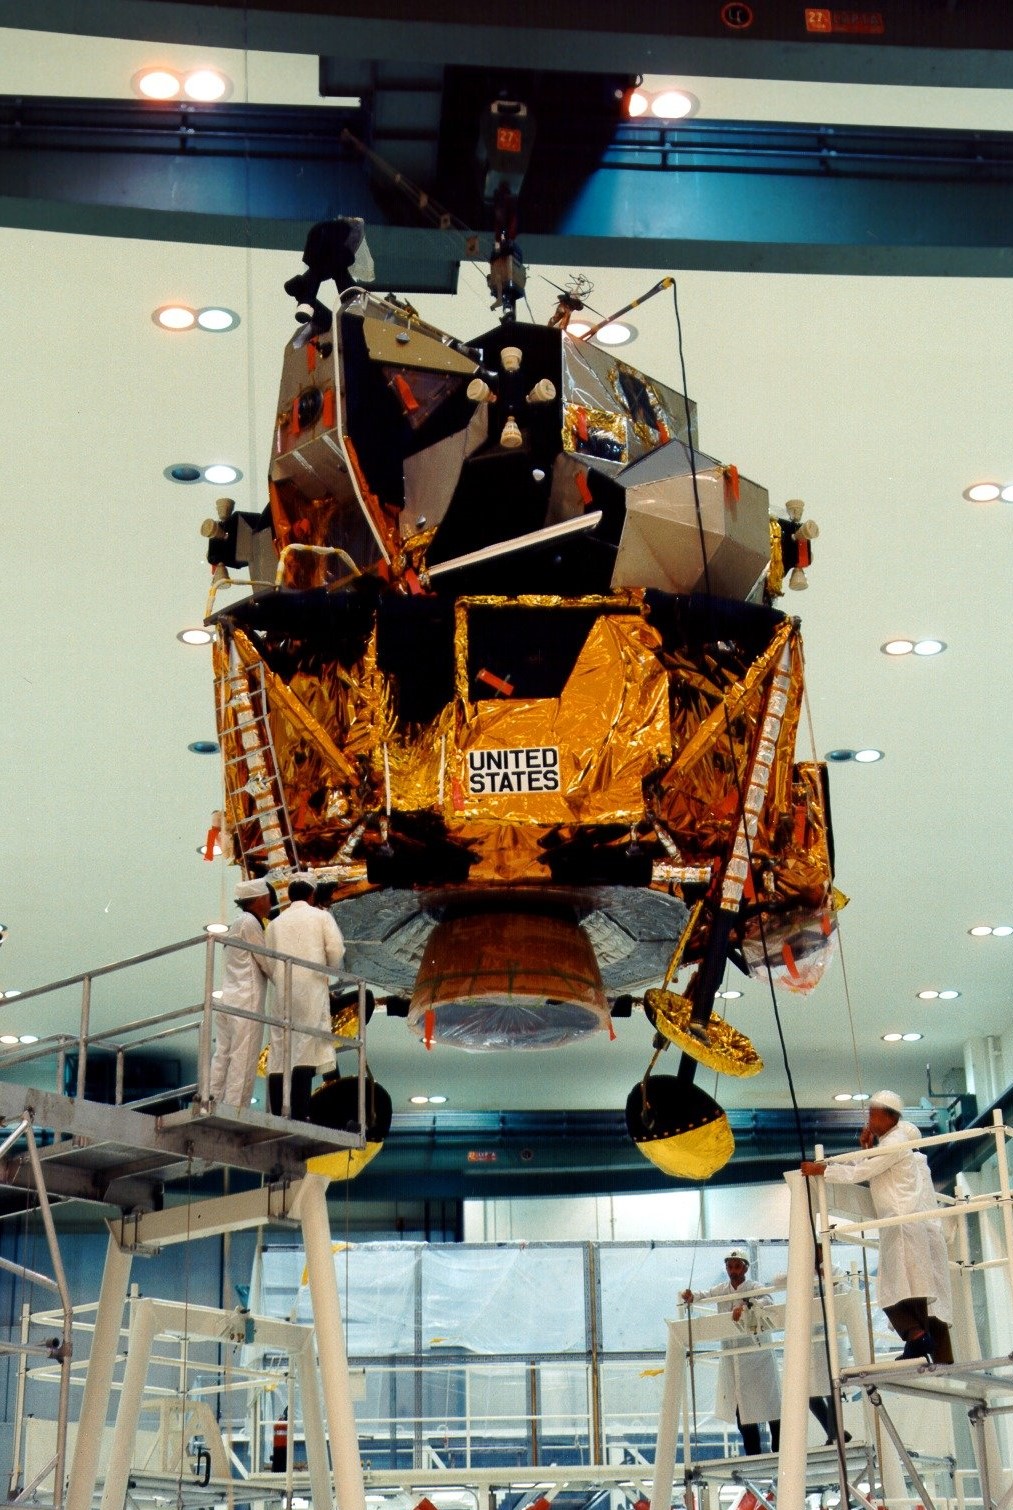 In the Manned Spacecraft Operations Building (MSOB) at NASA’s Kennedy Space Center, workers finish attaching the landing gear to the Apollo 12 Lunar Module (LM)